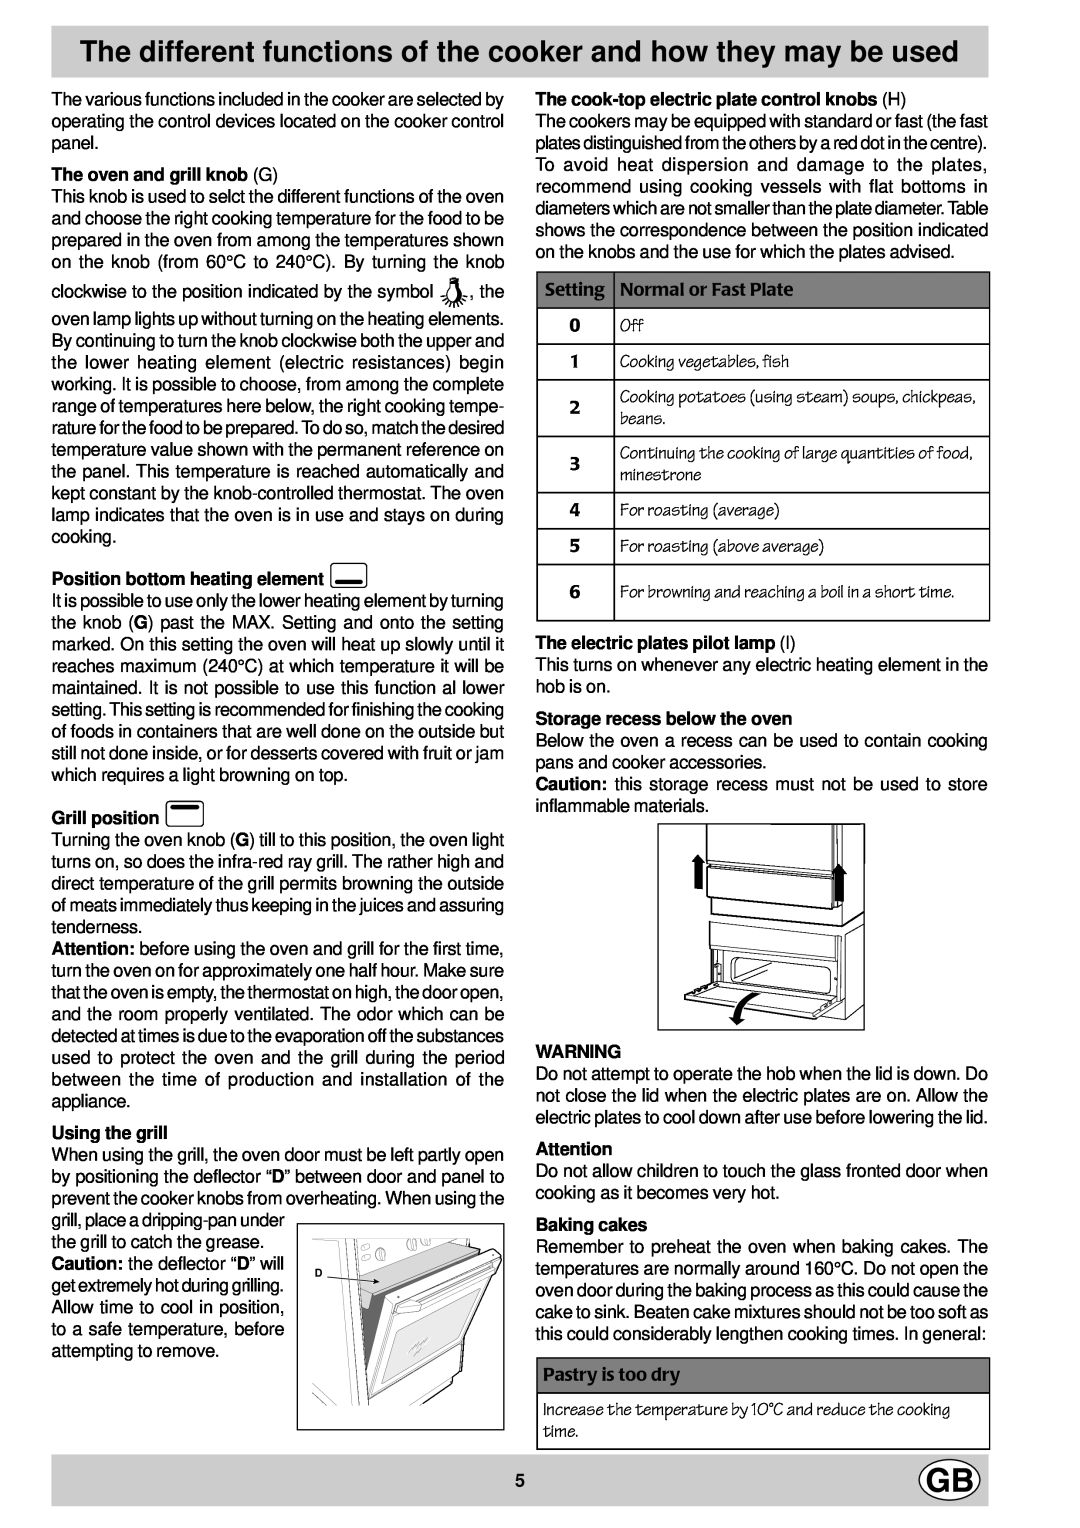 Indesit KG 3044 BE/G manual The oven and grill knob G, Position bottom heating element, Grill position, Using the grill 